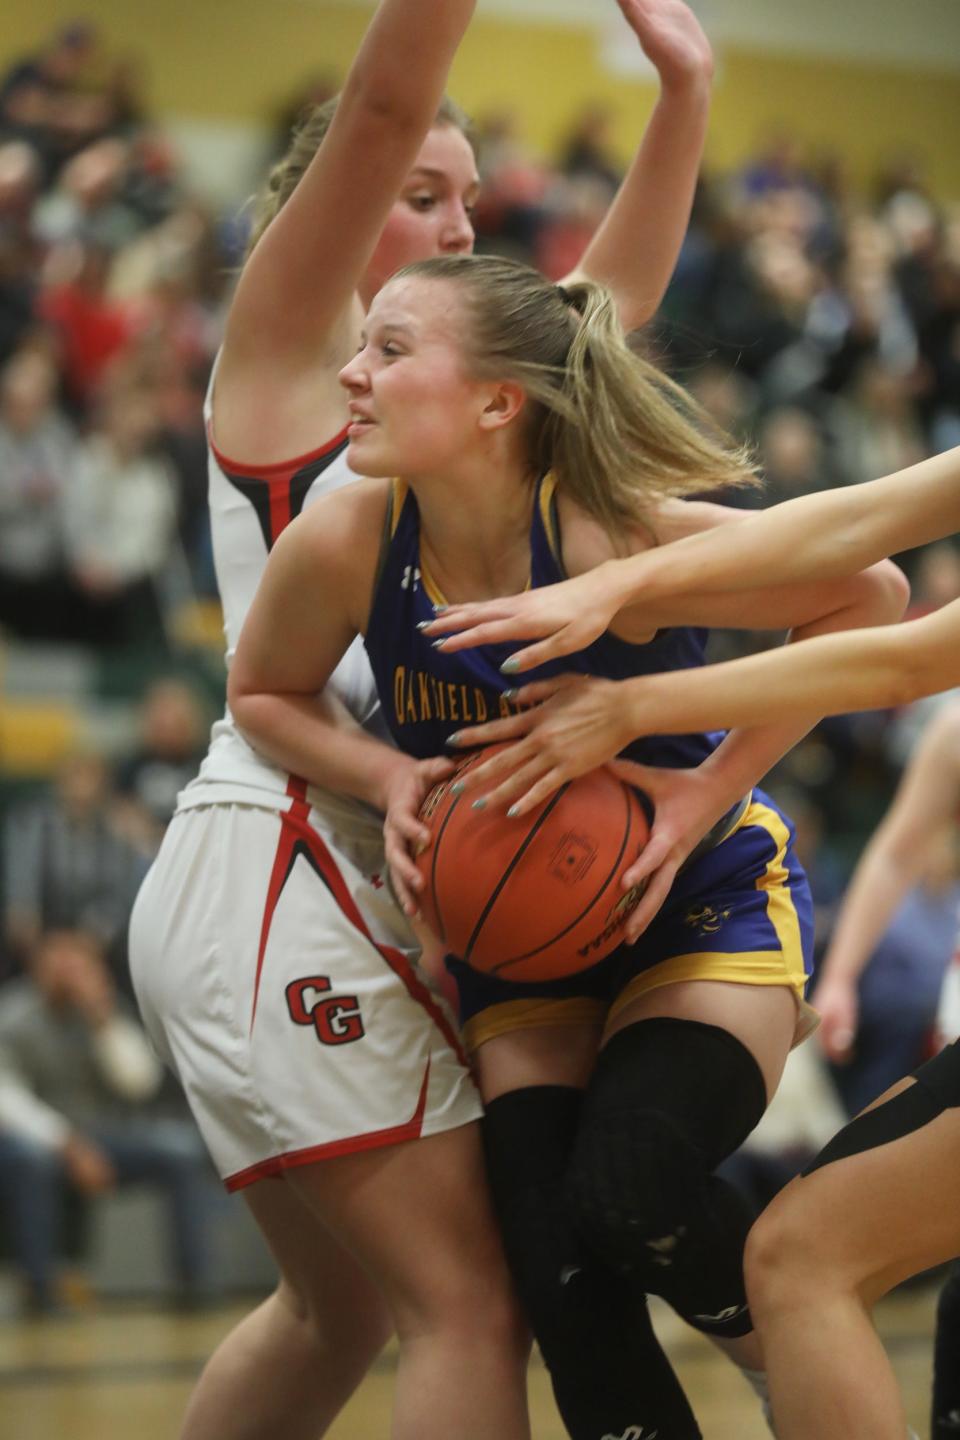 Oakfield-Alabama's Caitlin Ryan drives to the basket and gets  fouled during their Section V Class C1 championship game against Canisteo-Greenwood at Rush Henrietta High School.  